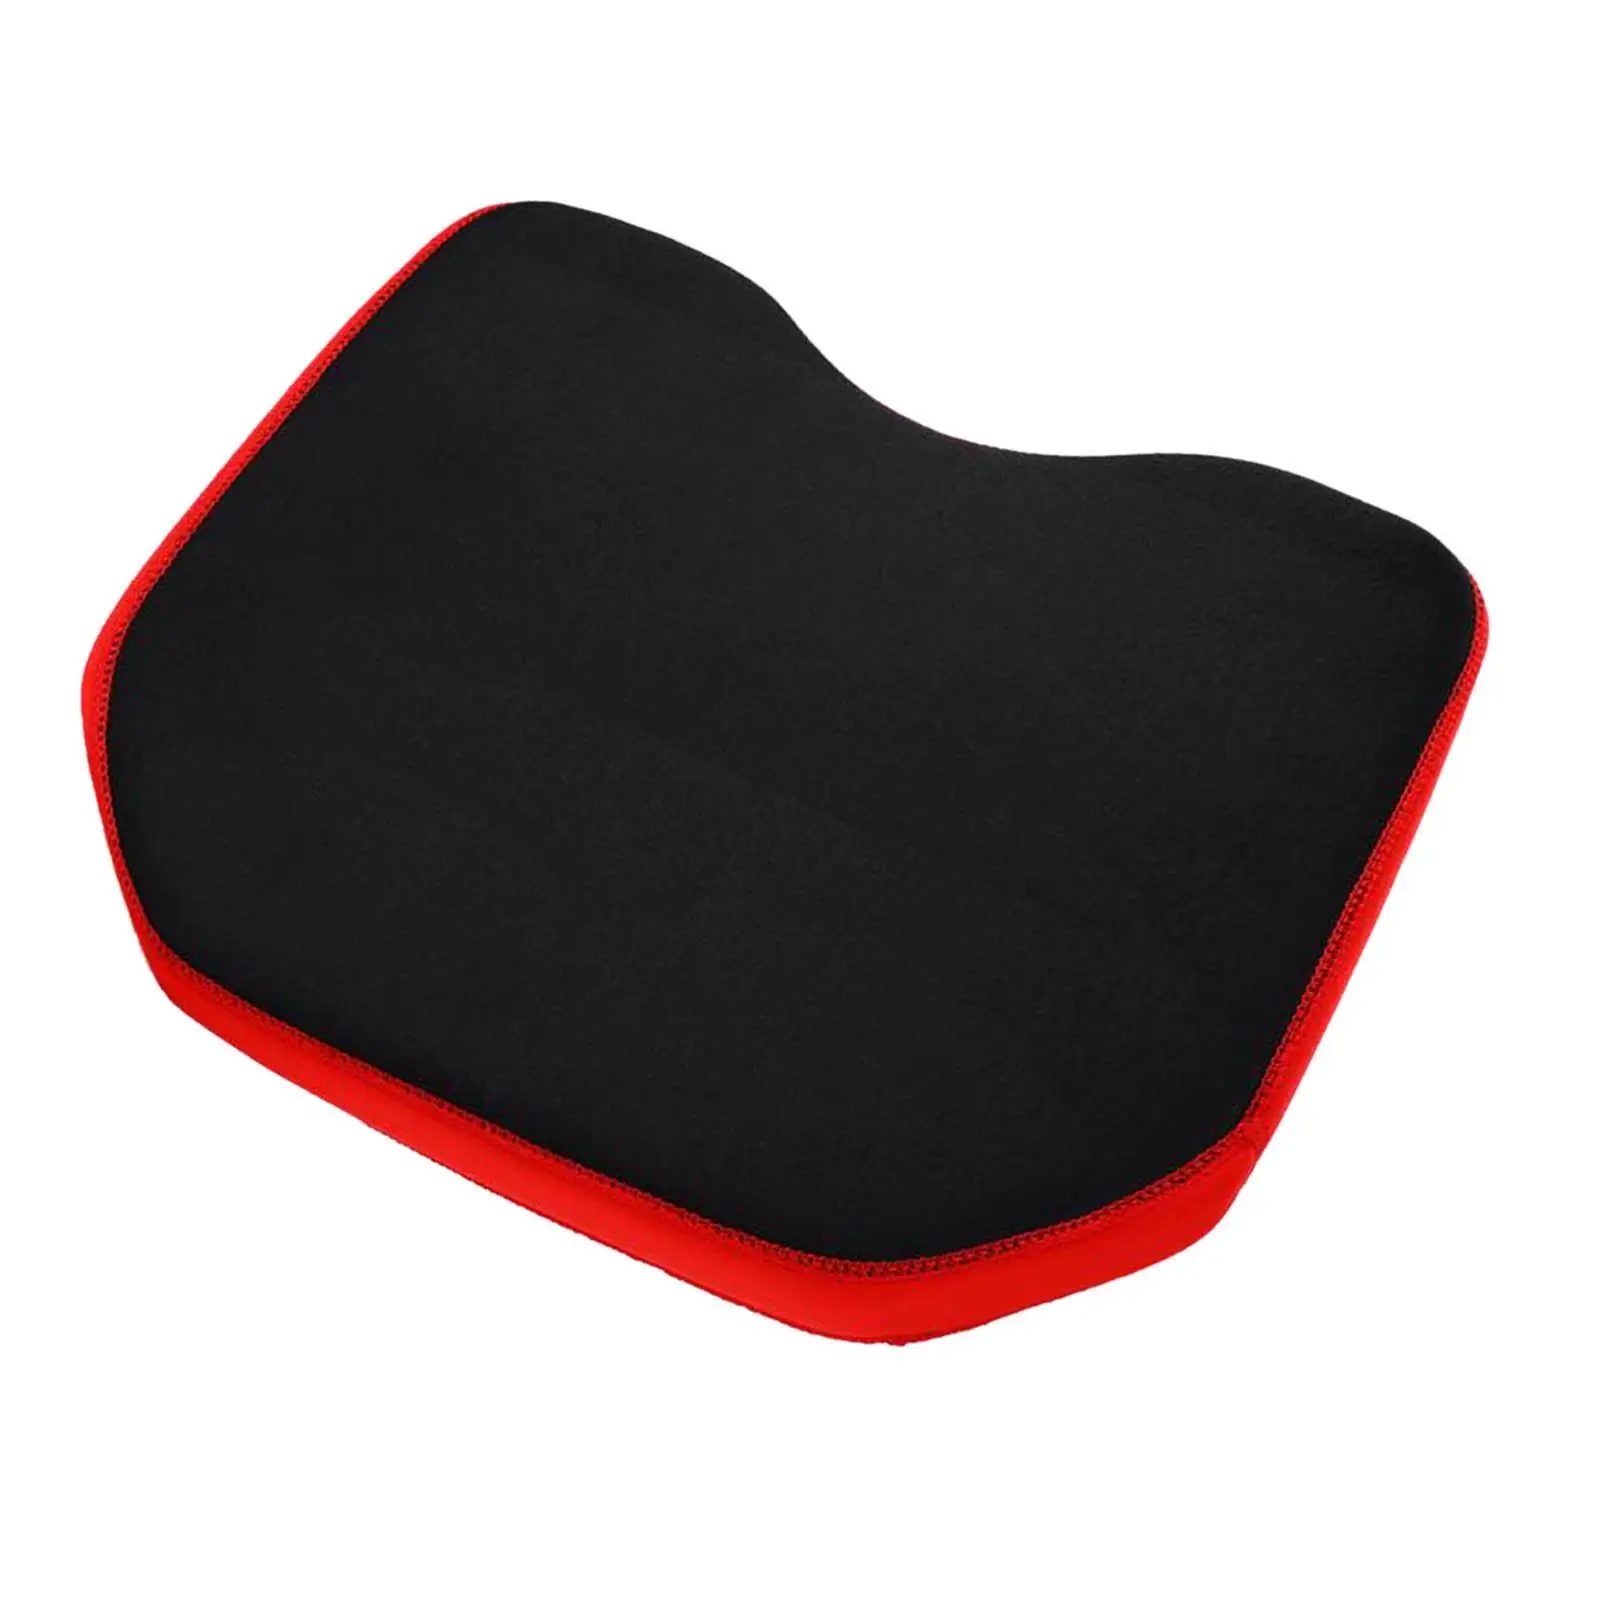 Boat Seat Cushion  Detachable Seat Waterproof Sit Soft Accessory Boat Cushions Rowing Boat Boat Bolster  Camping Outdoor Boats